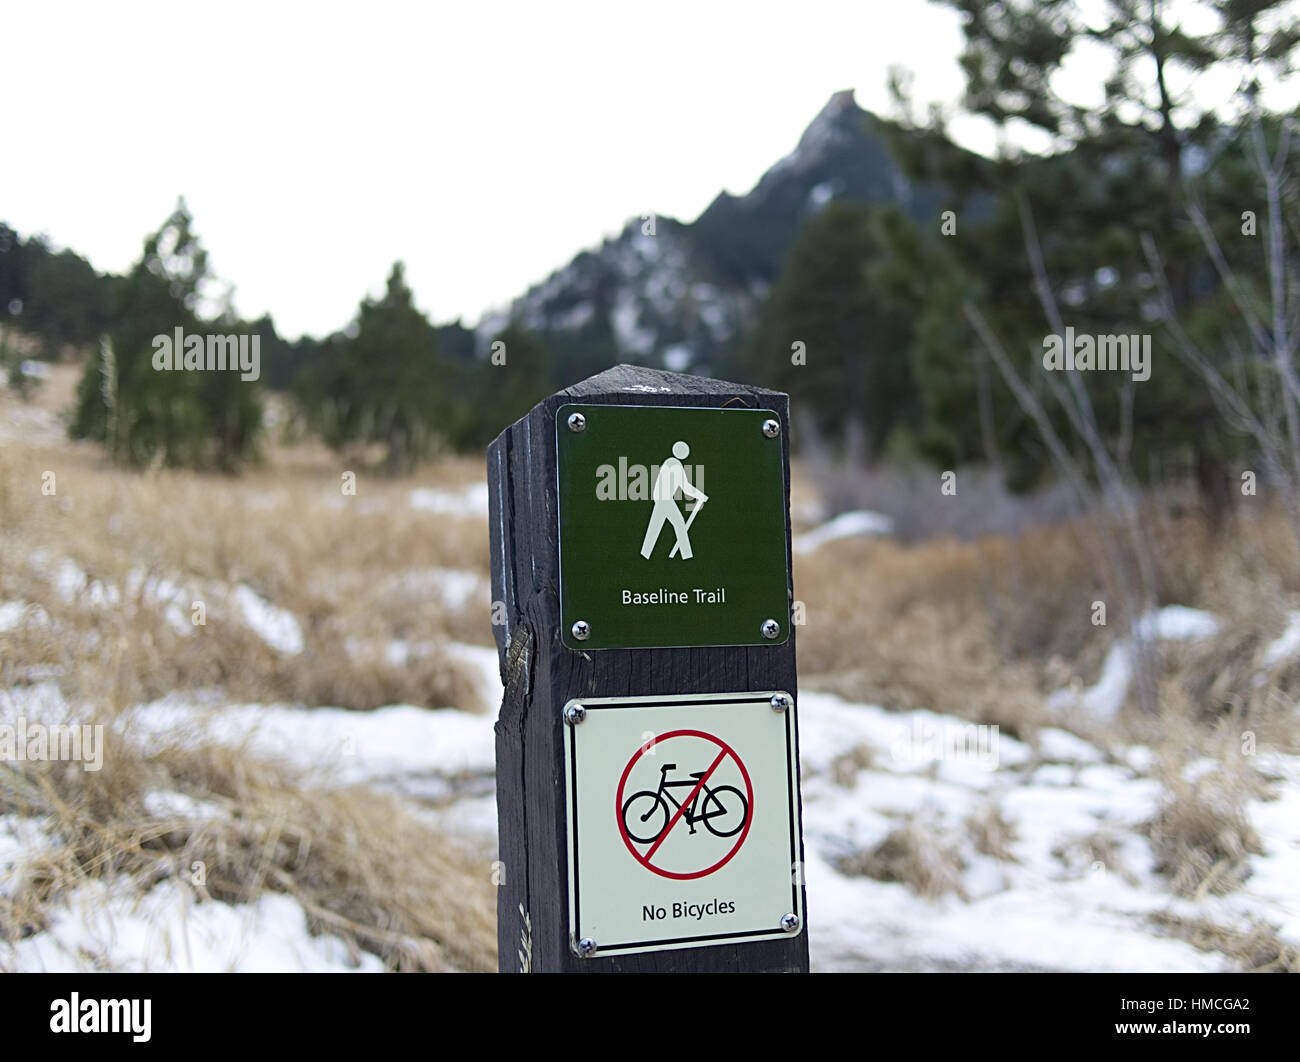 The trailhead for hiking Baseline Trail in a Colorado state park. Stock Photo